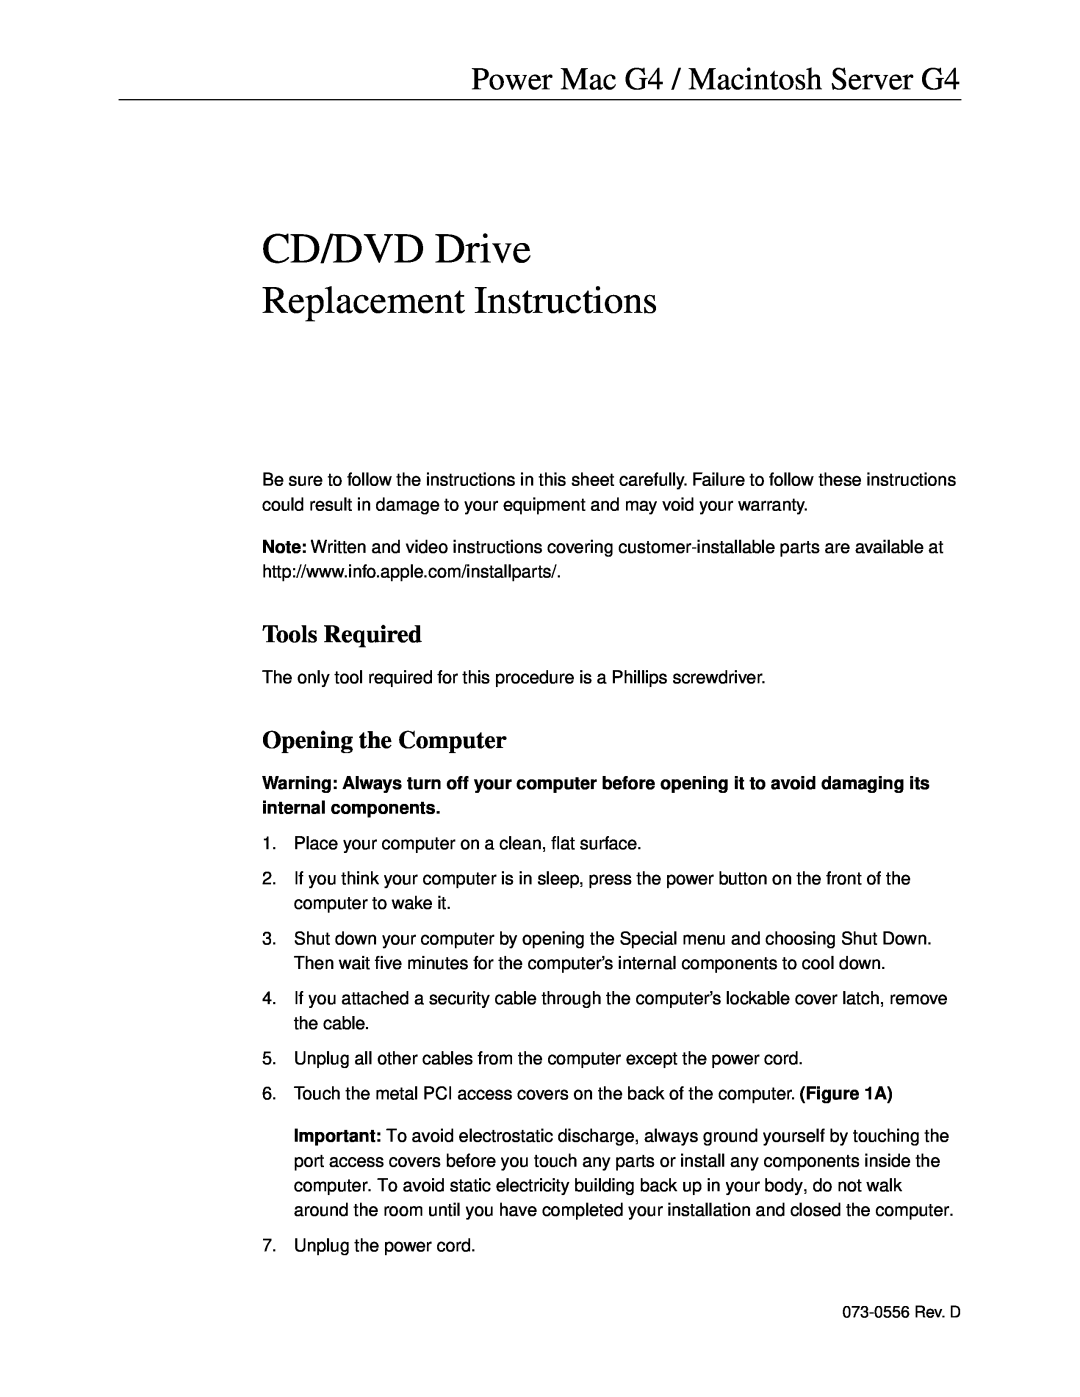 Apple CD/DVD Drive warranty Tools Required, Opening the Computer, Replacement Instructions 